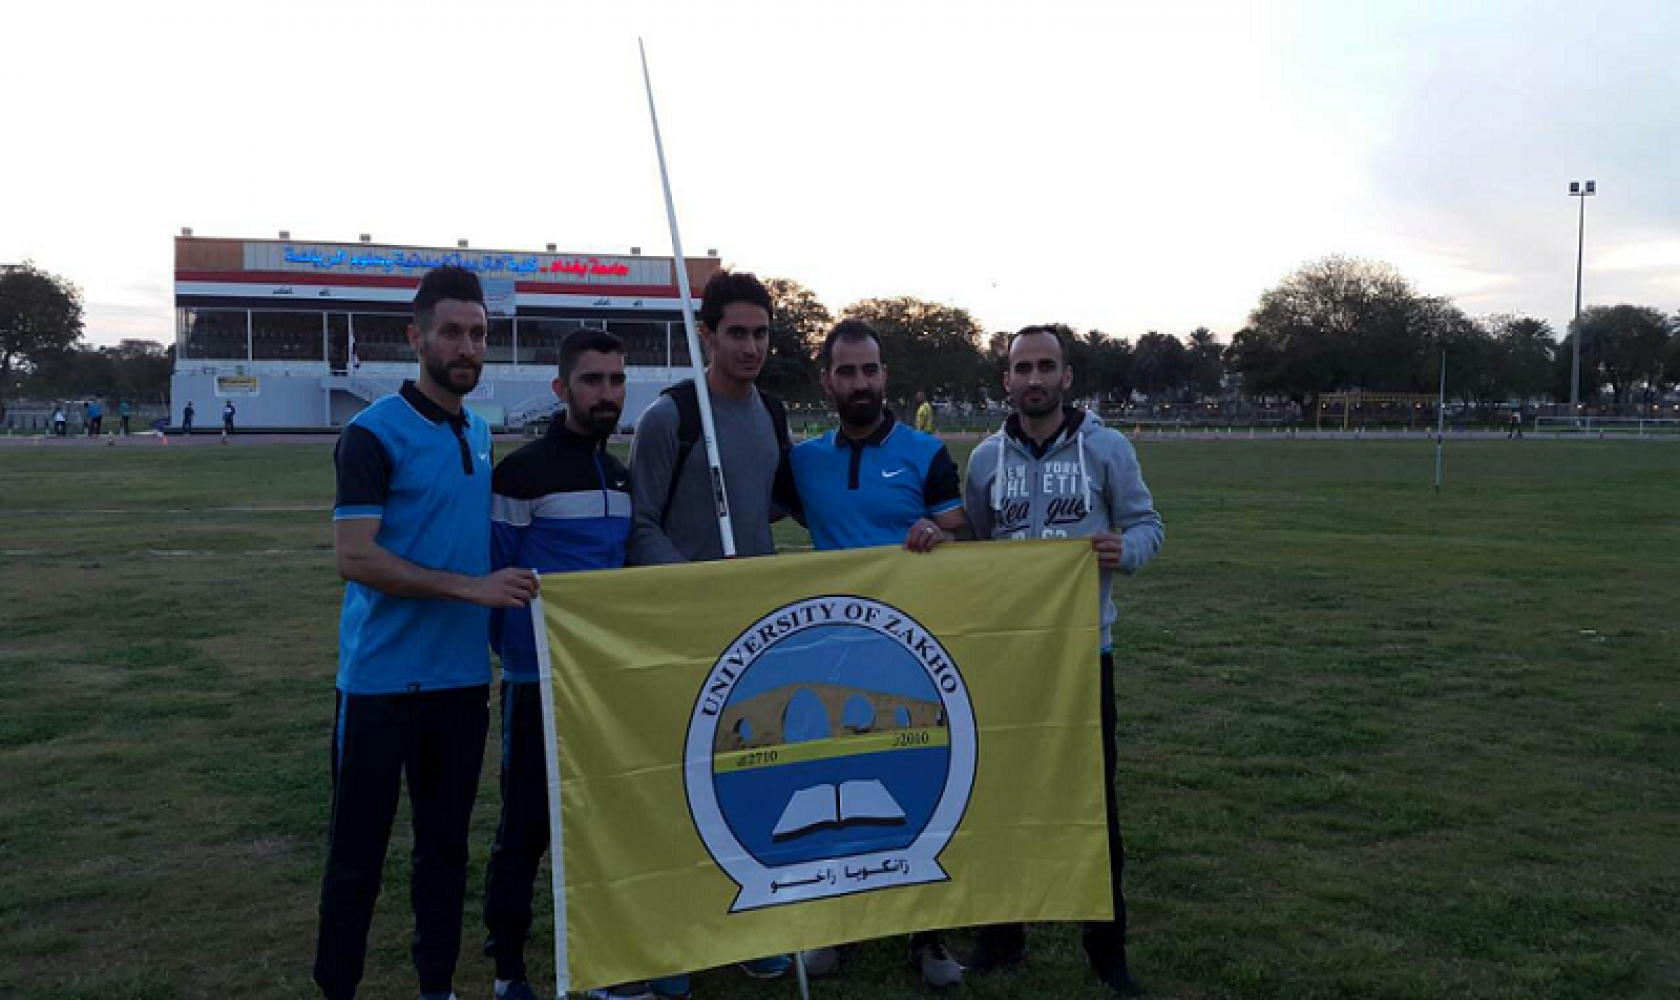 The University of Zakho Achieves Second Place in Iraqi Universities Championship